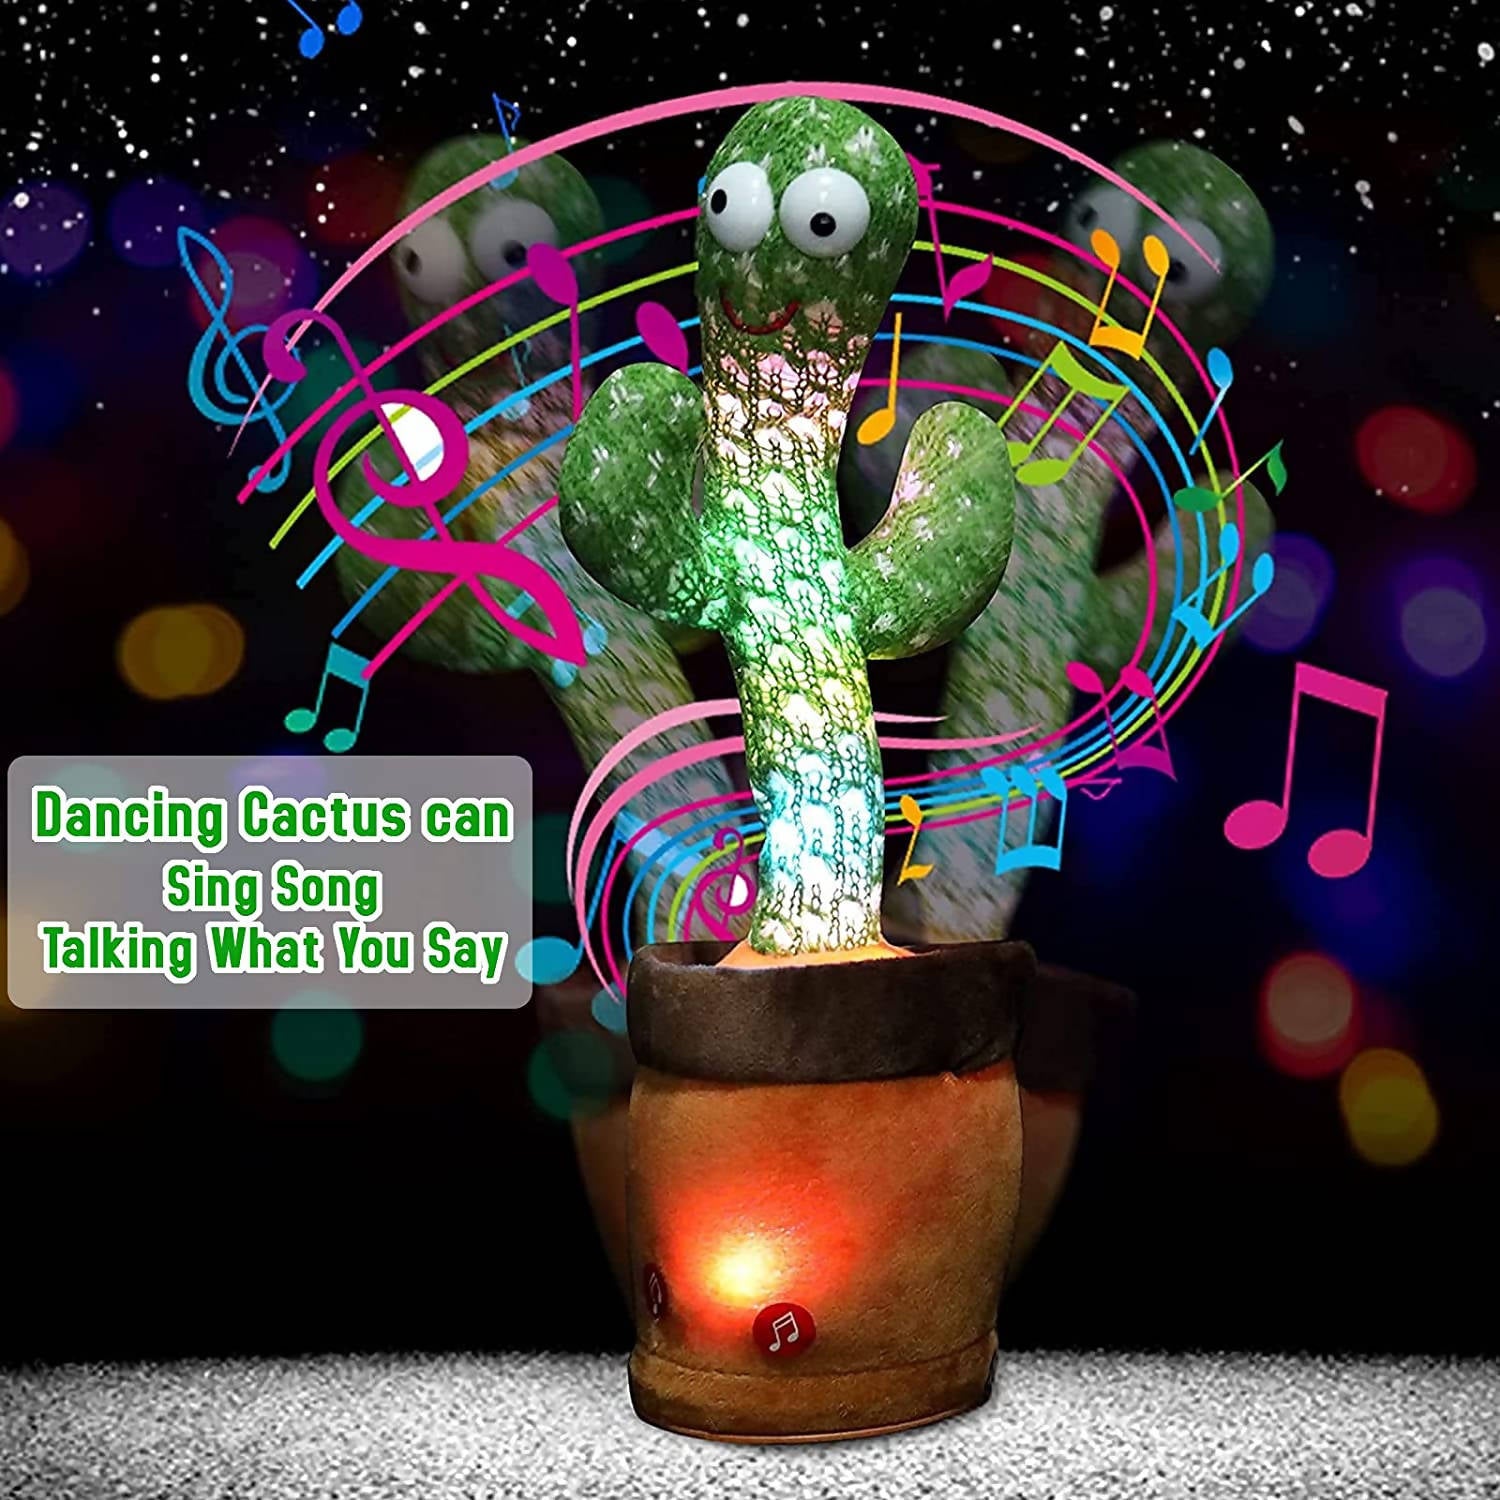 Singing Cactus Recording and Repeat Your Words